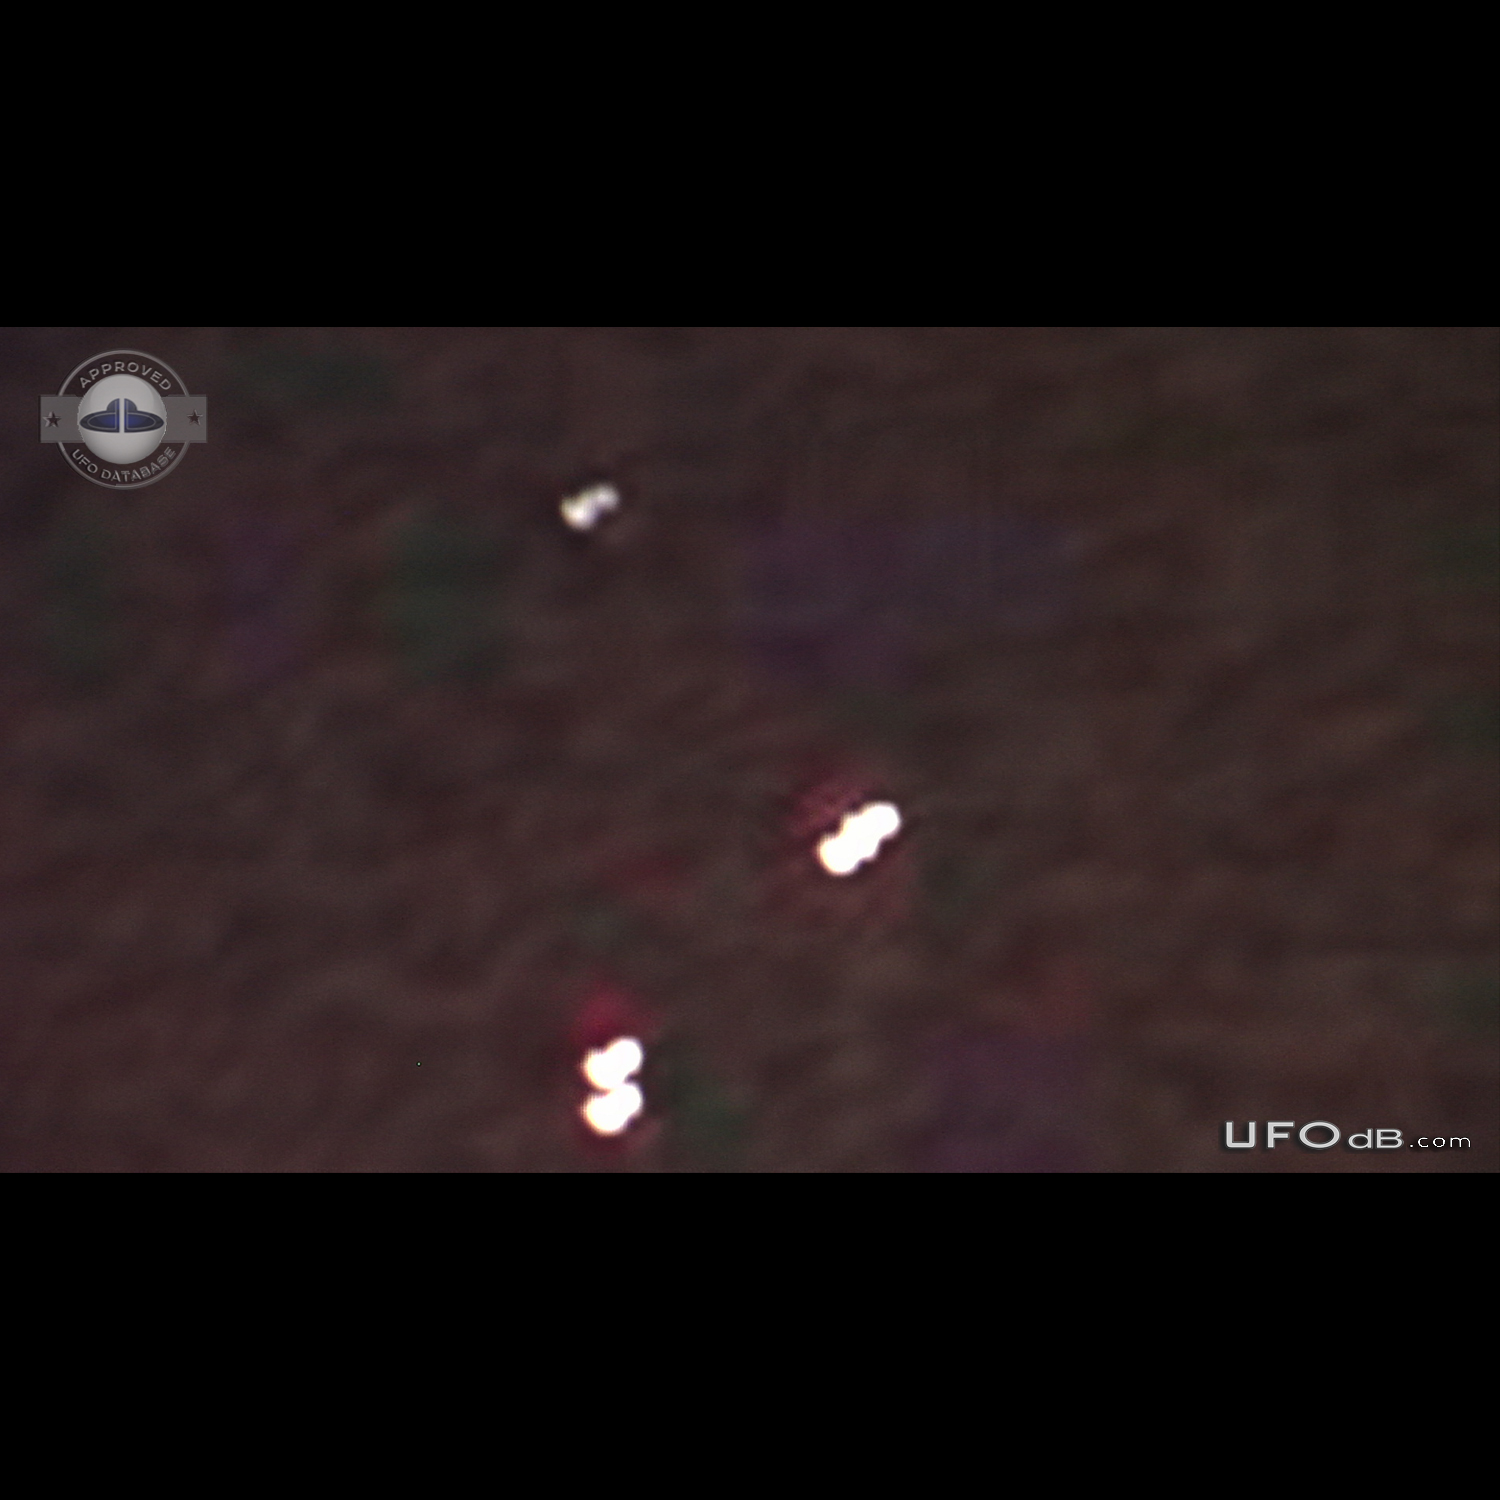 Aliens invisible to humans visiting Dean Park New South Wales Australi UFO Picture #762-1